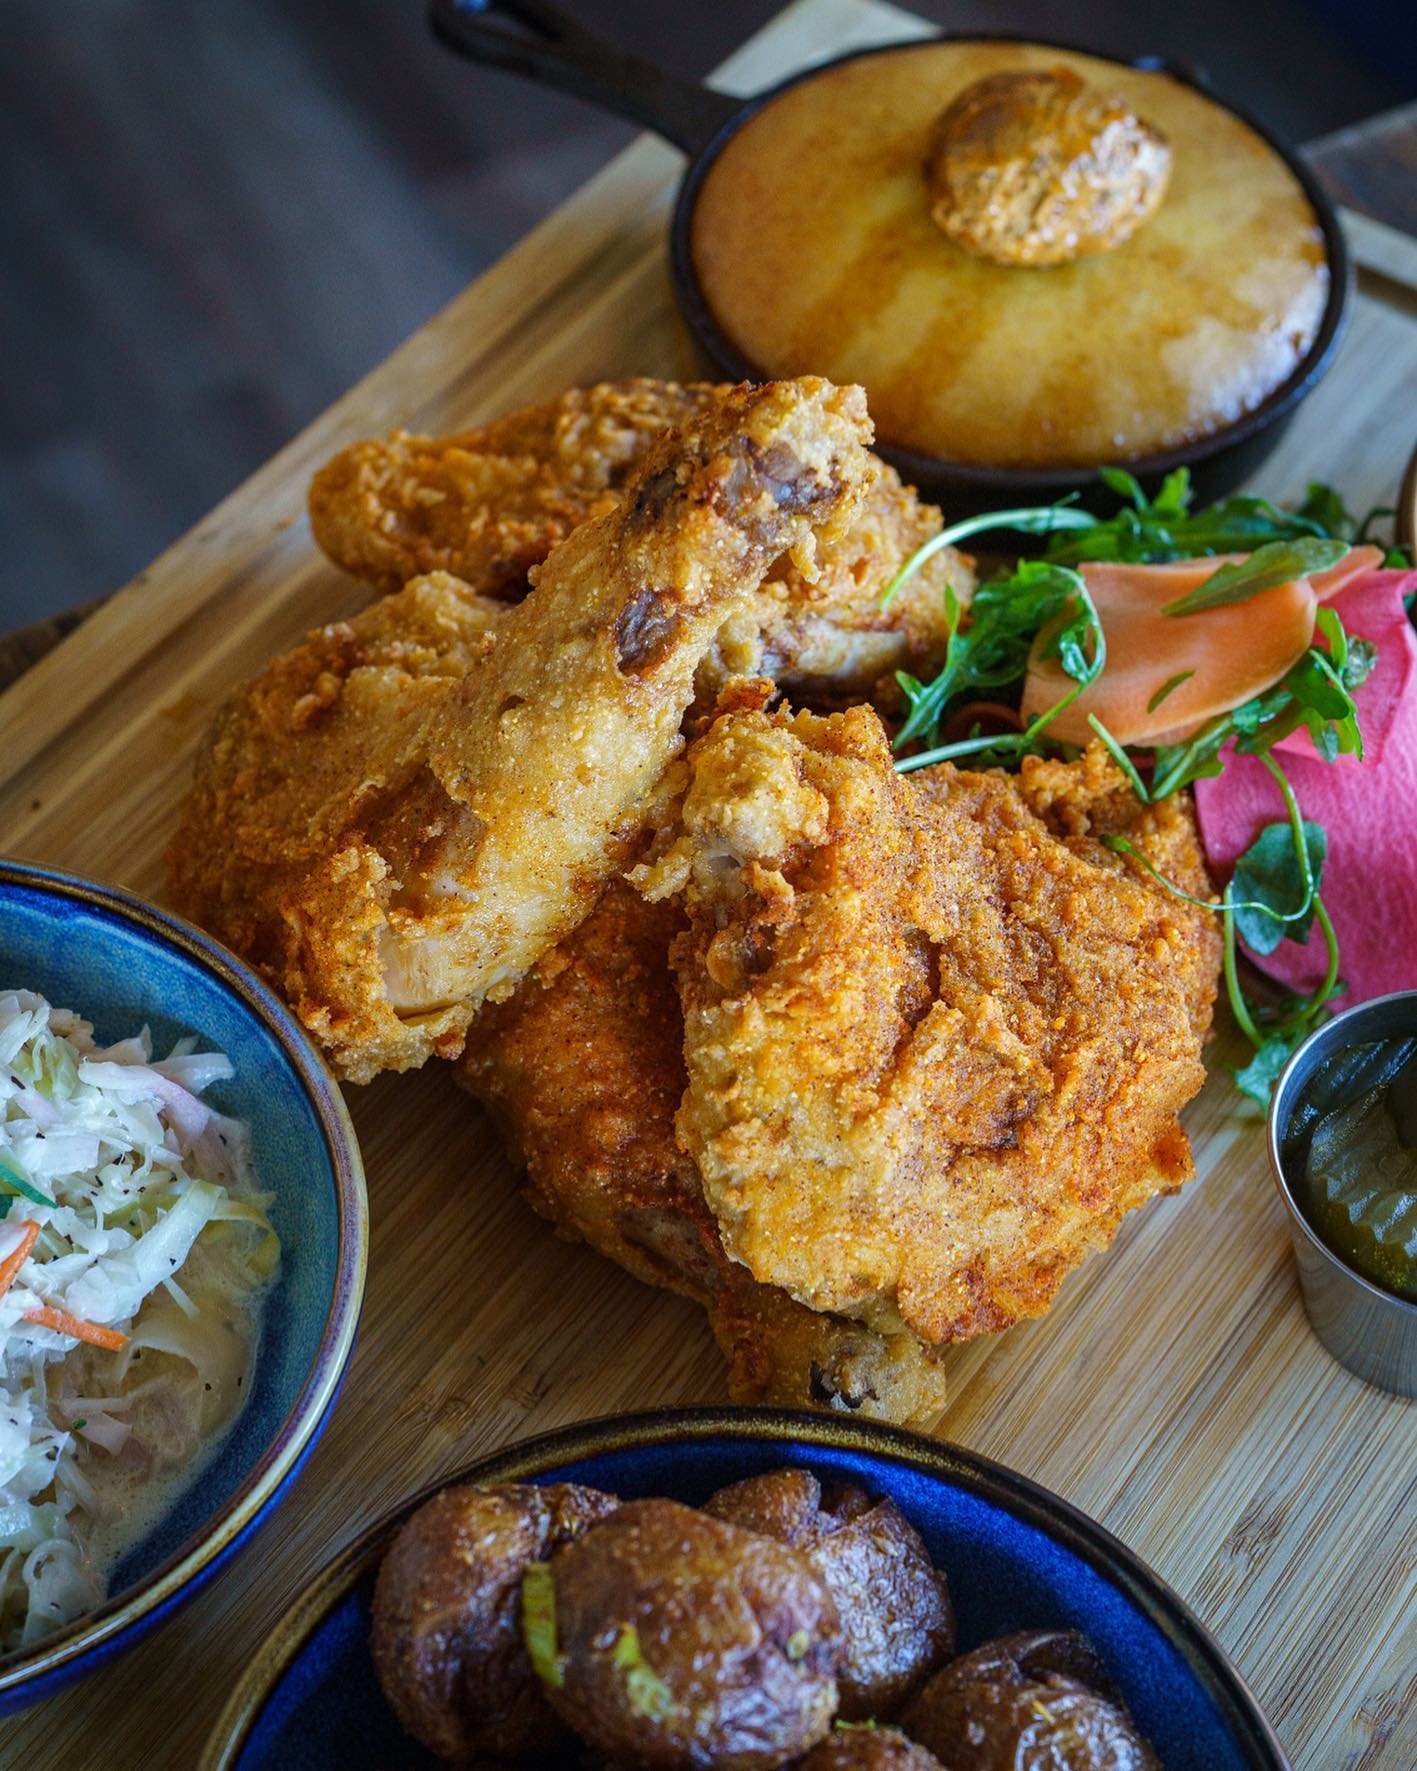 Did you say fried chicken? @freebirdsquamish has you covered 🍗 their platters are served family style with cajun potatoes, baked beans, slaw, corn bread with creole butter and pickles on the side.